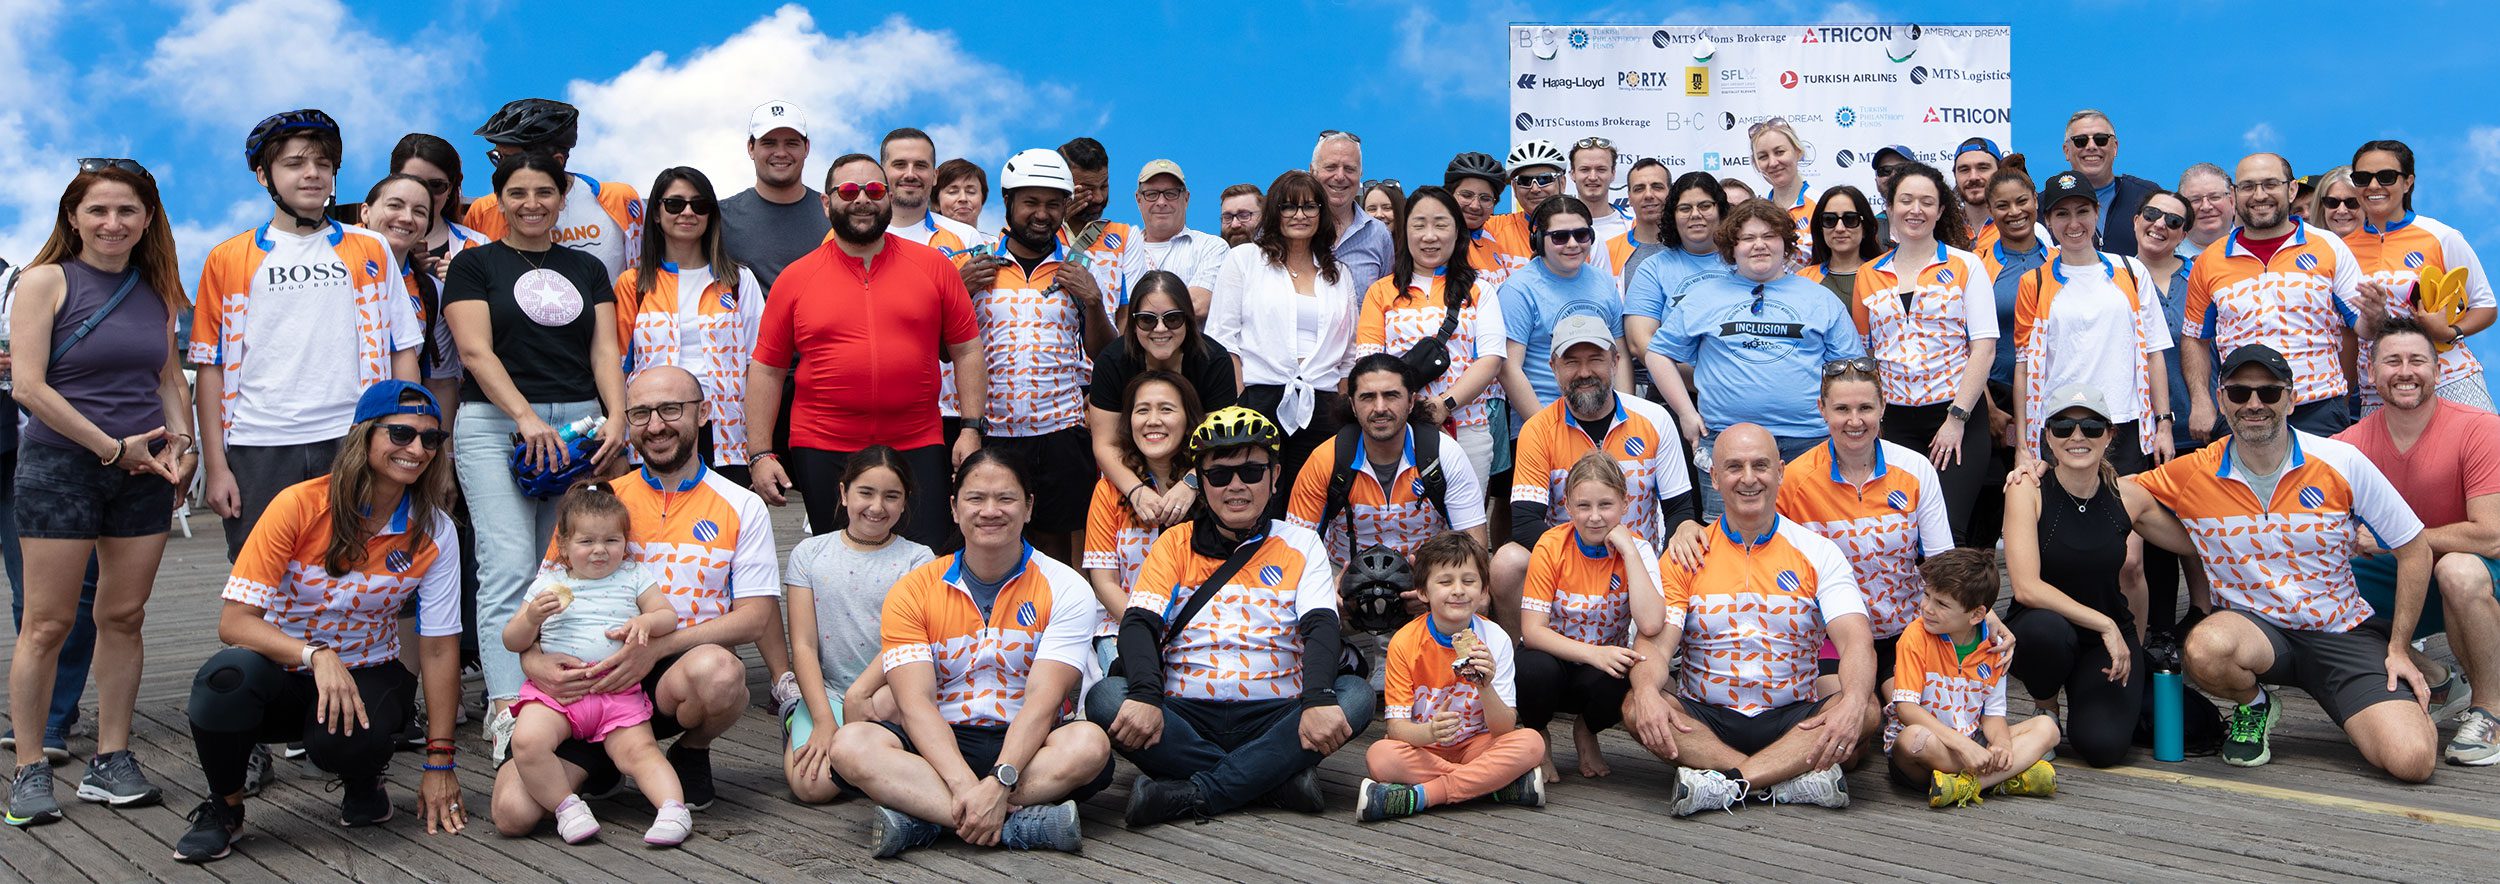 MTS Logistics, NYC Shipping Leader, Gives Back By Raising Over $100,000 Through Its 13th Annual Bike Tour With MTS For Autism